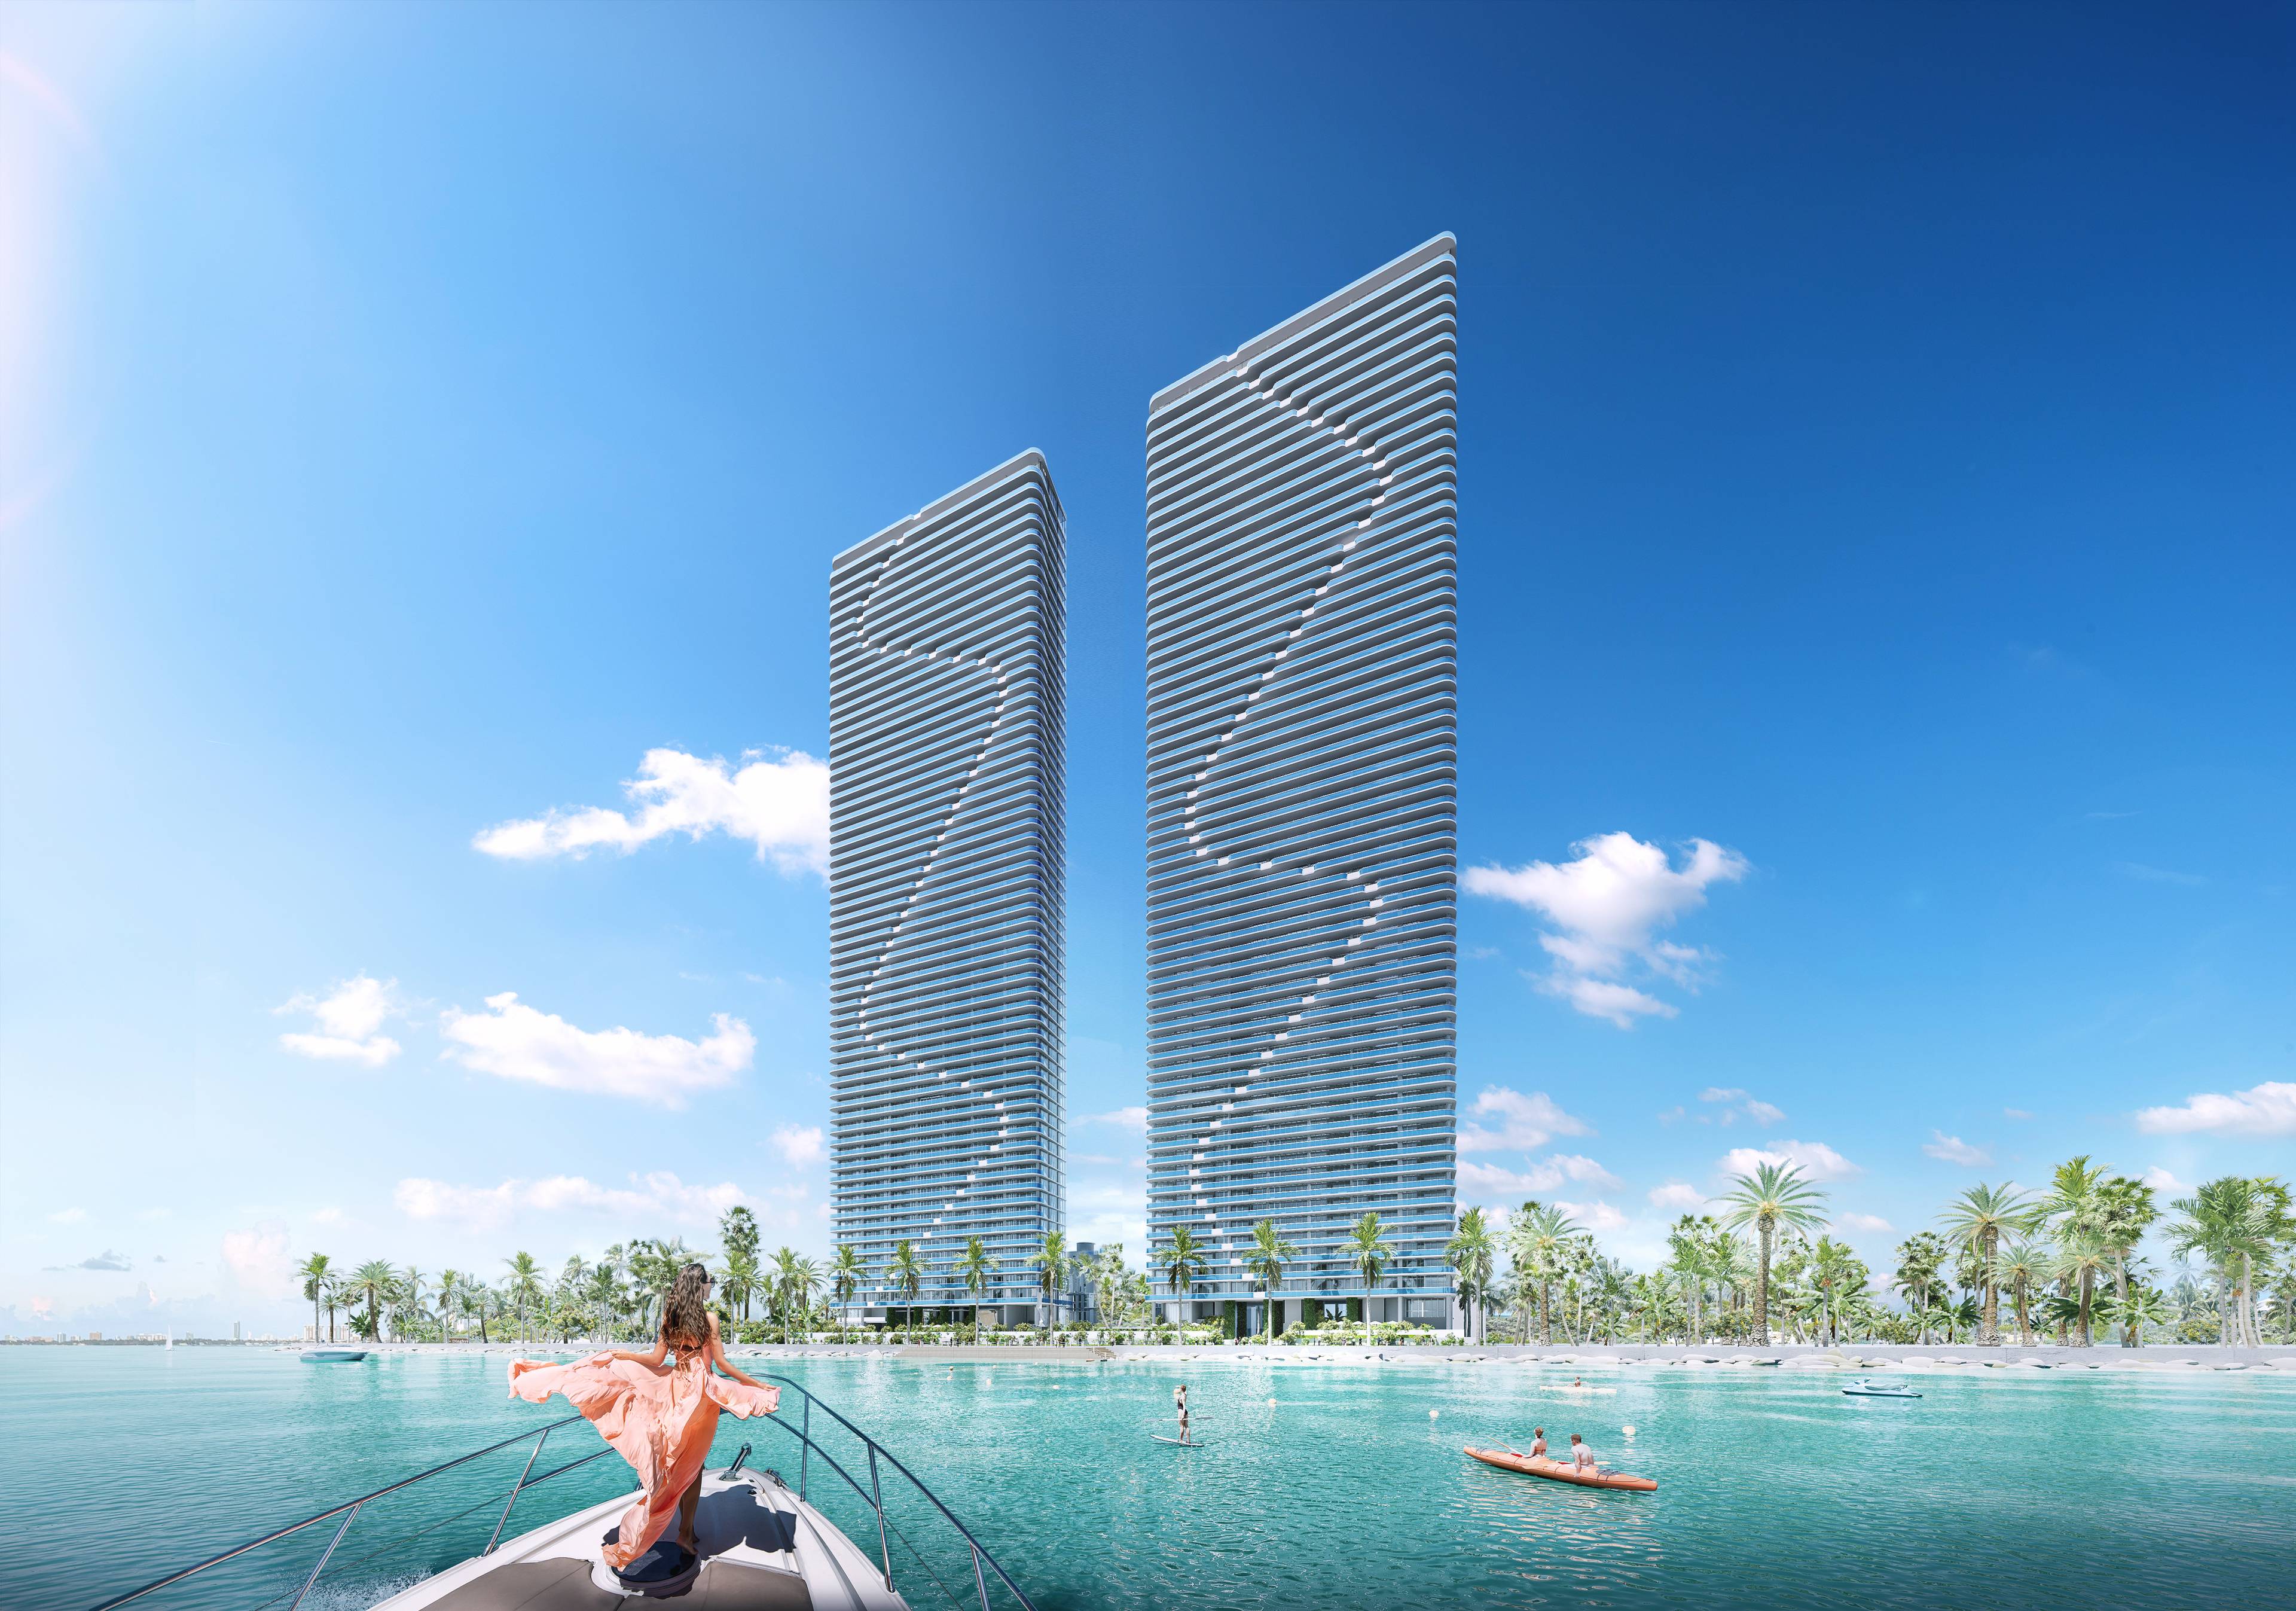 MIAMI WATERFRONT CONDO | TALLEST TWIN TOWERS IN THE US | WATER VIEWS, PARKING, TERRACE | 3 BED + OFFICE, 3.5 BATH